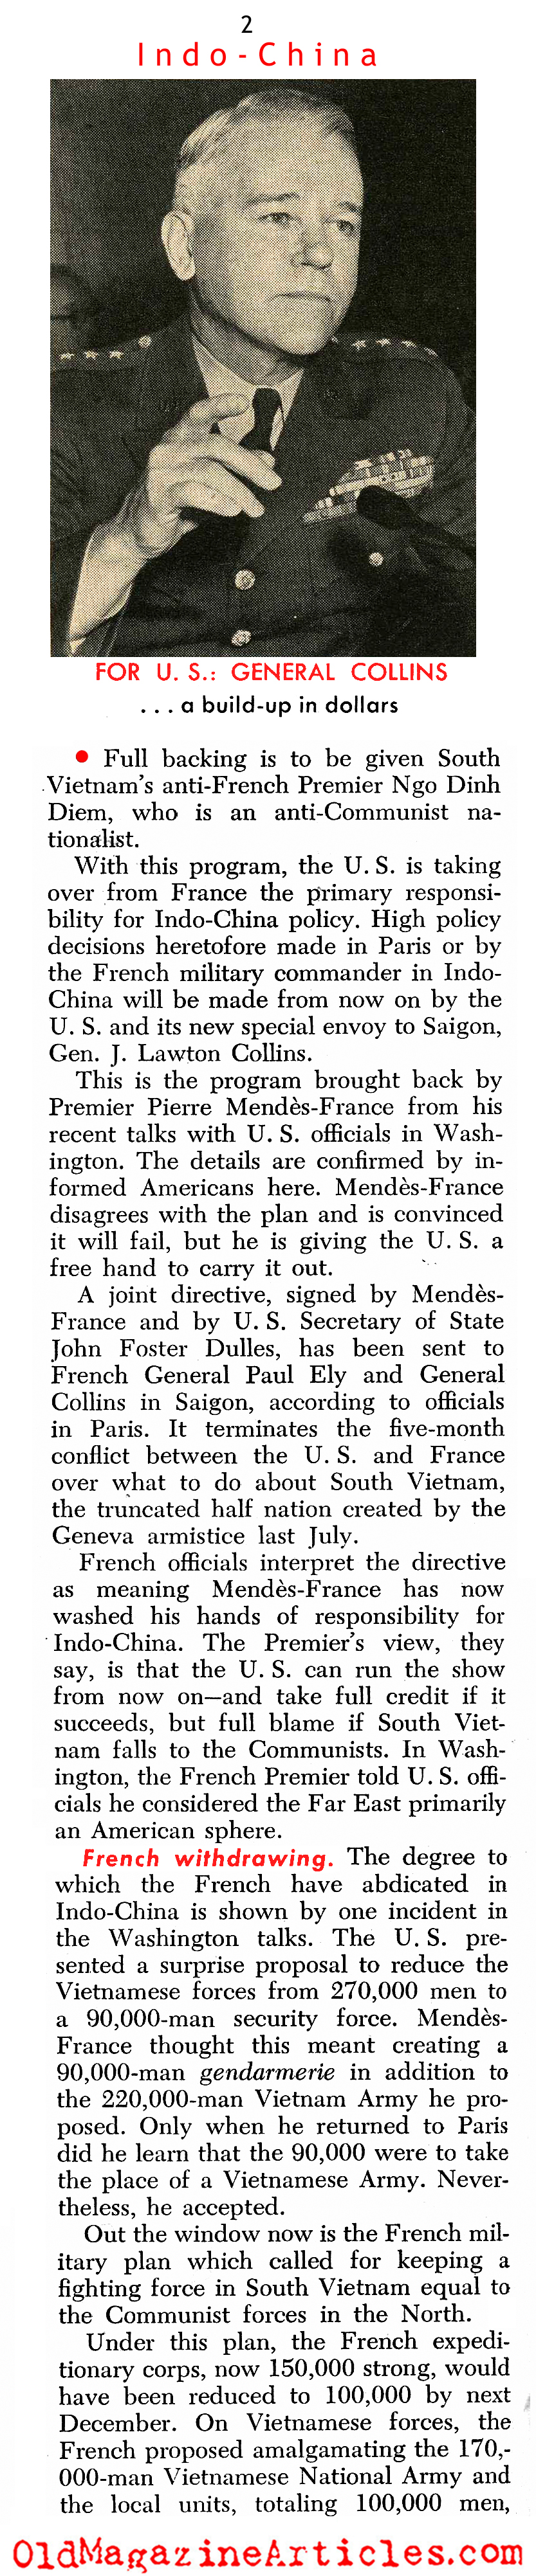 Our French Inheritance (United States News, 1954)